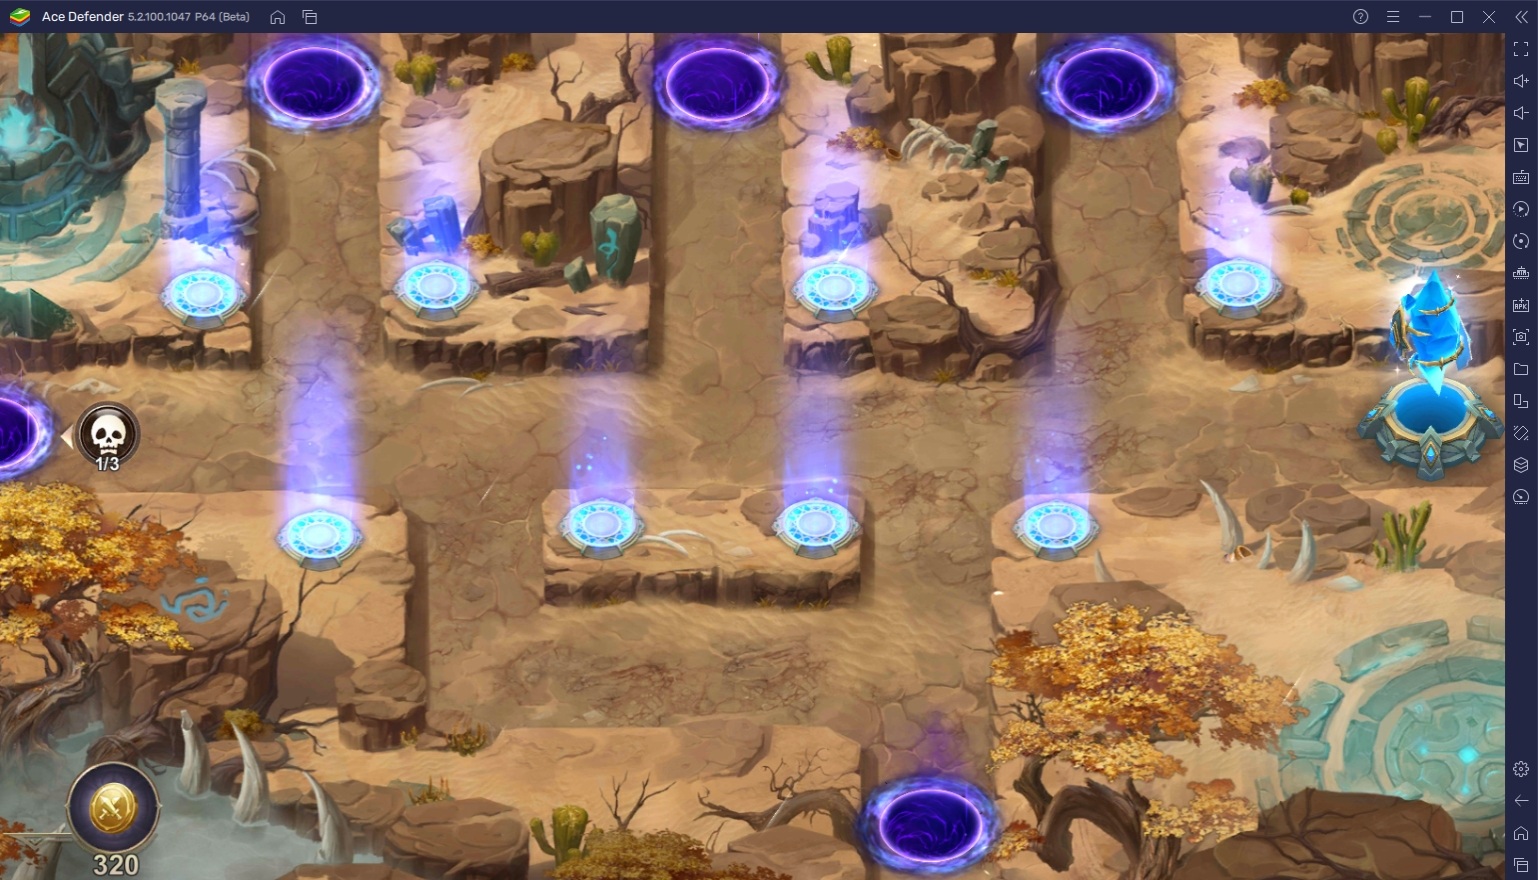 Advanced Tower Defense Strategies for Ace Defender